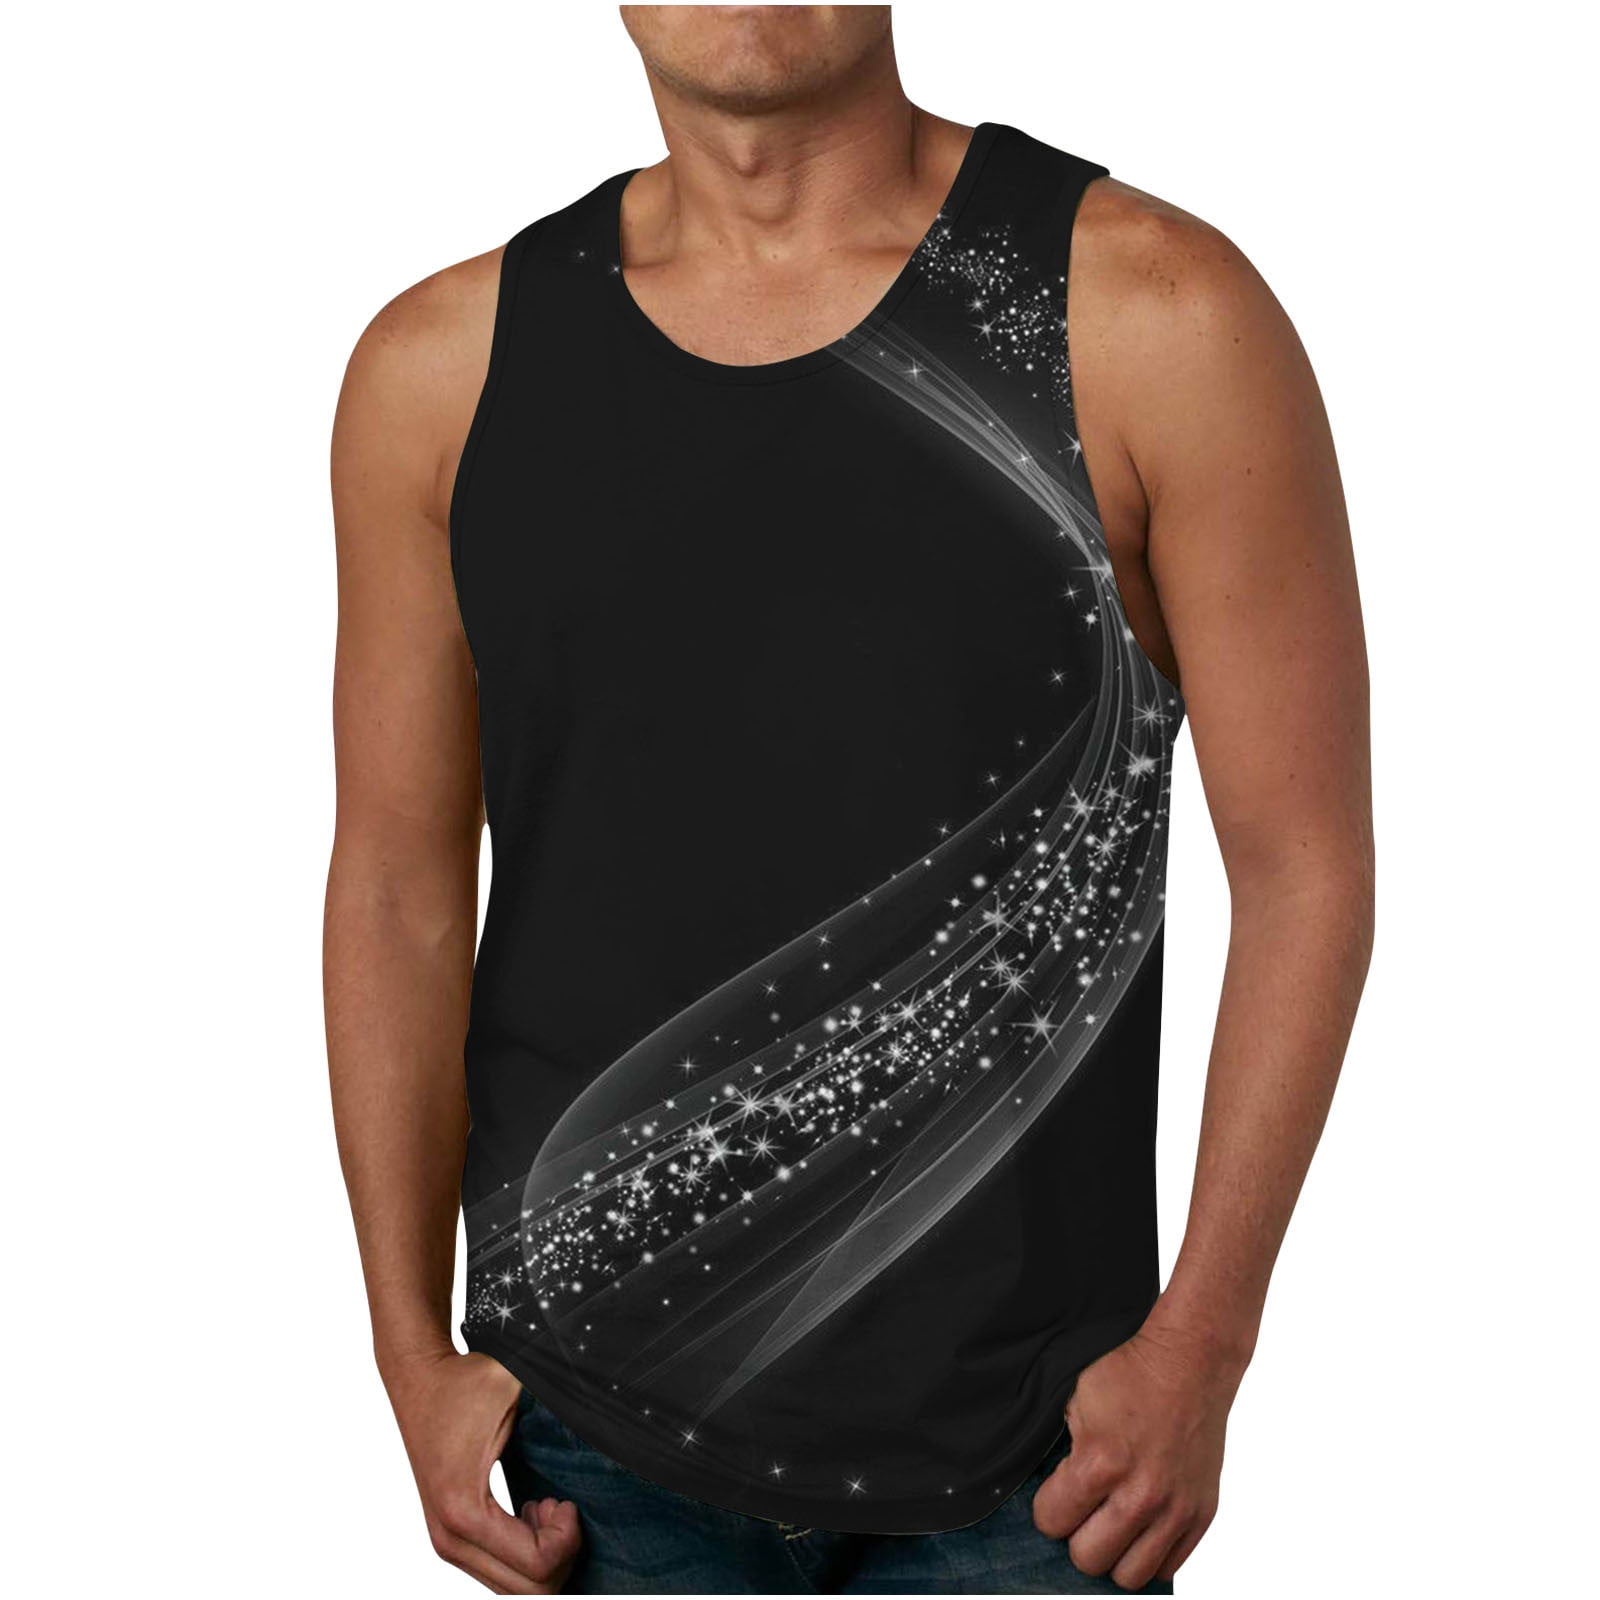 Summer Big and Tall Men's 3D Printed Tank Tops Novelty Funky Sleeveless ...